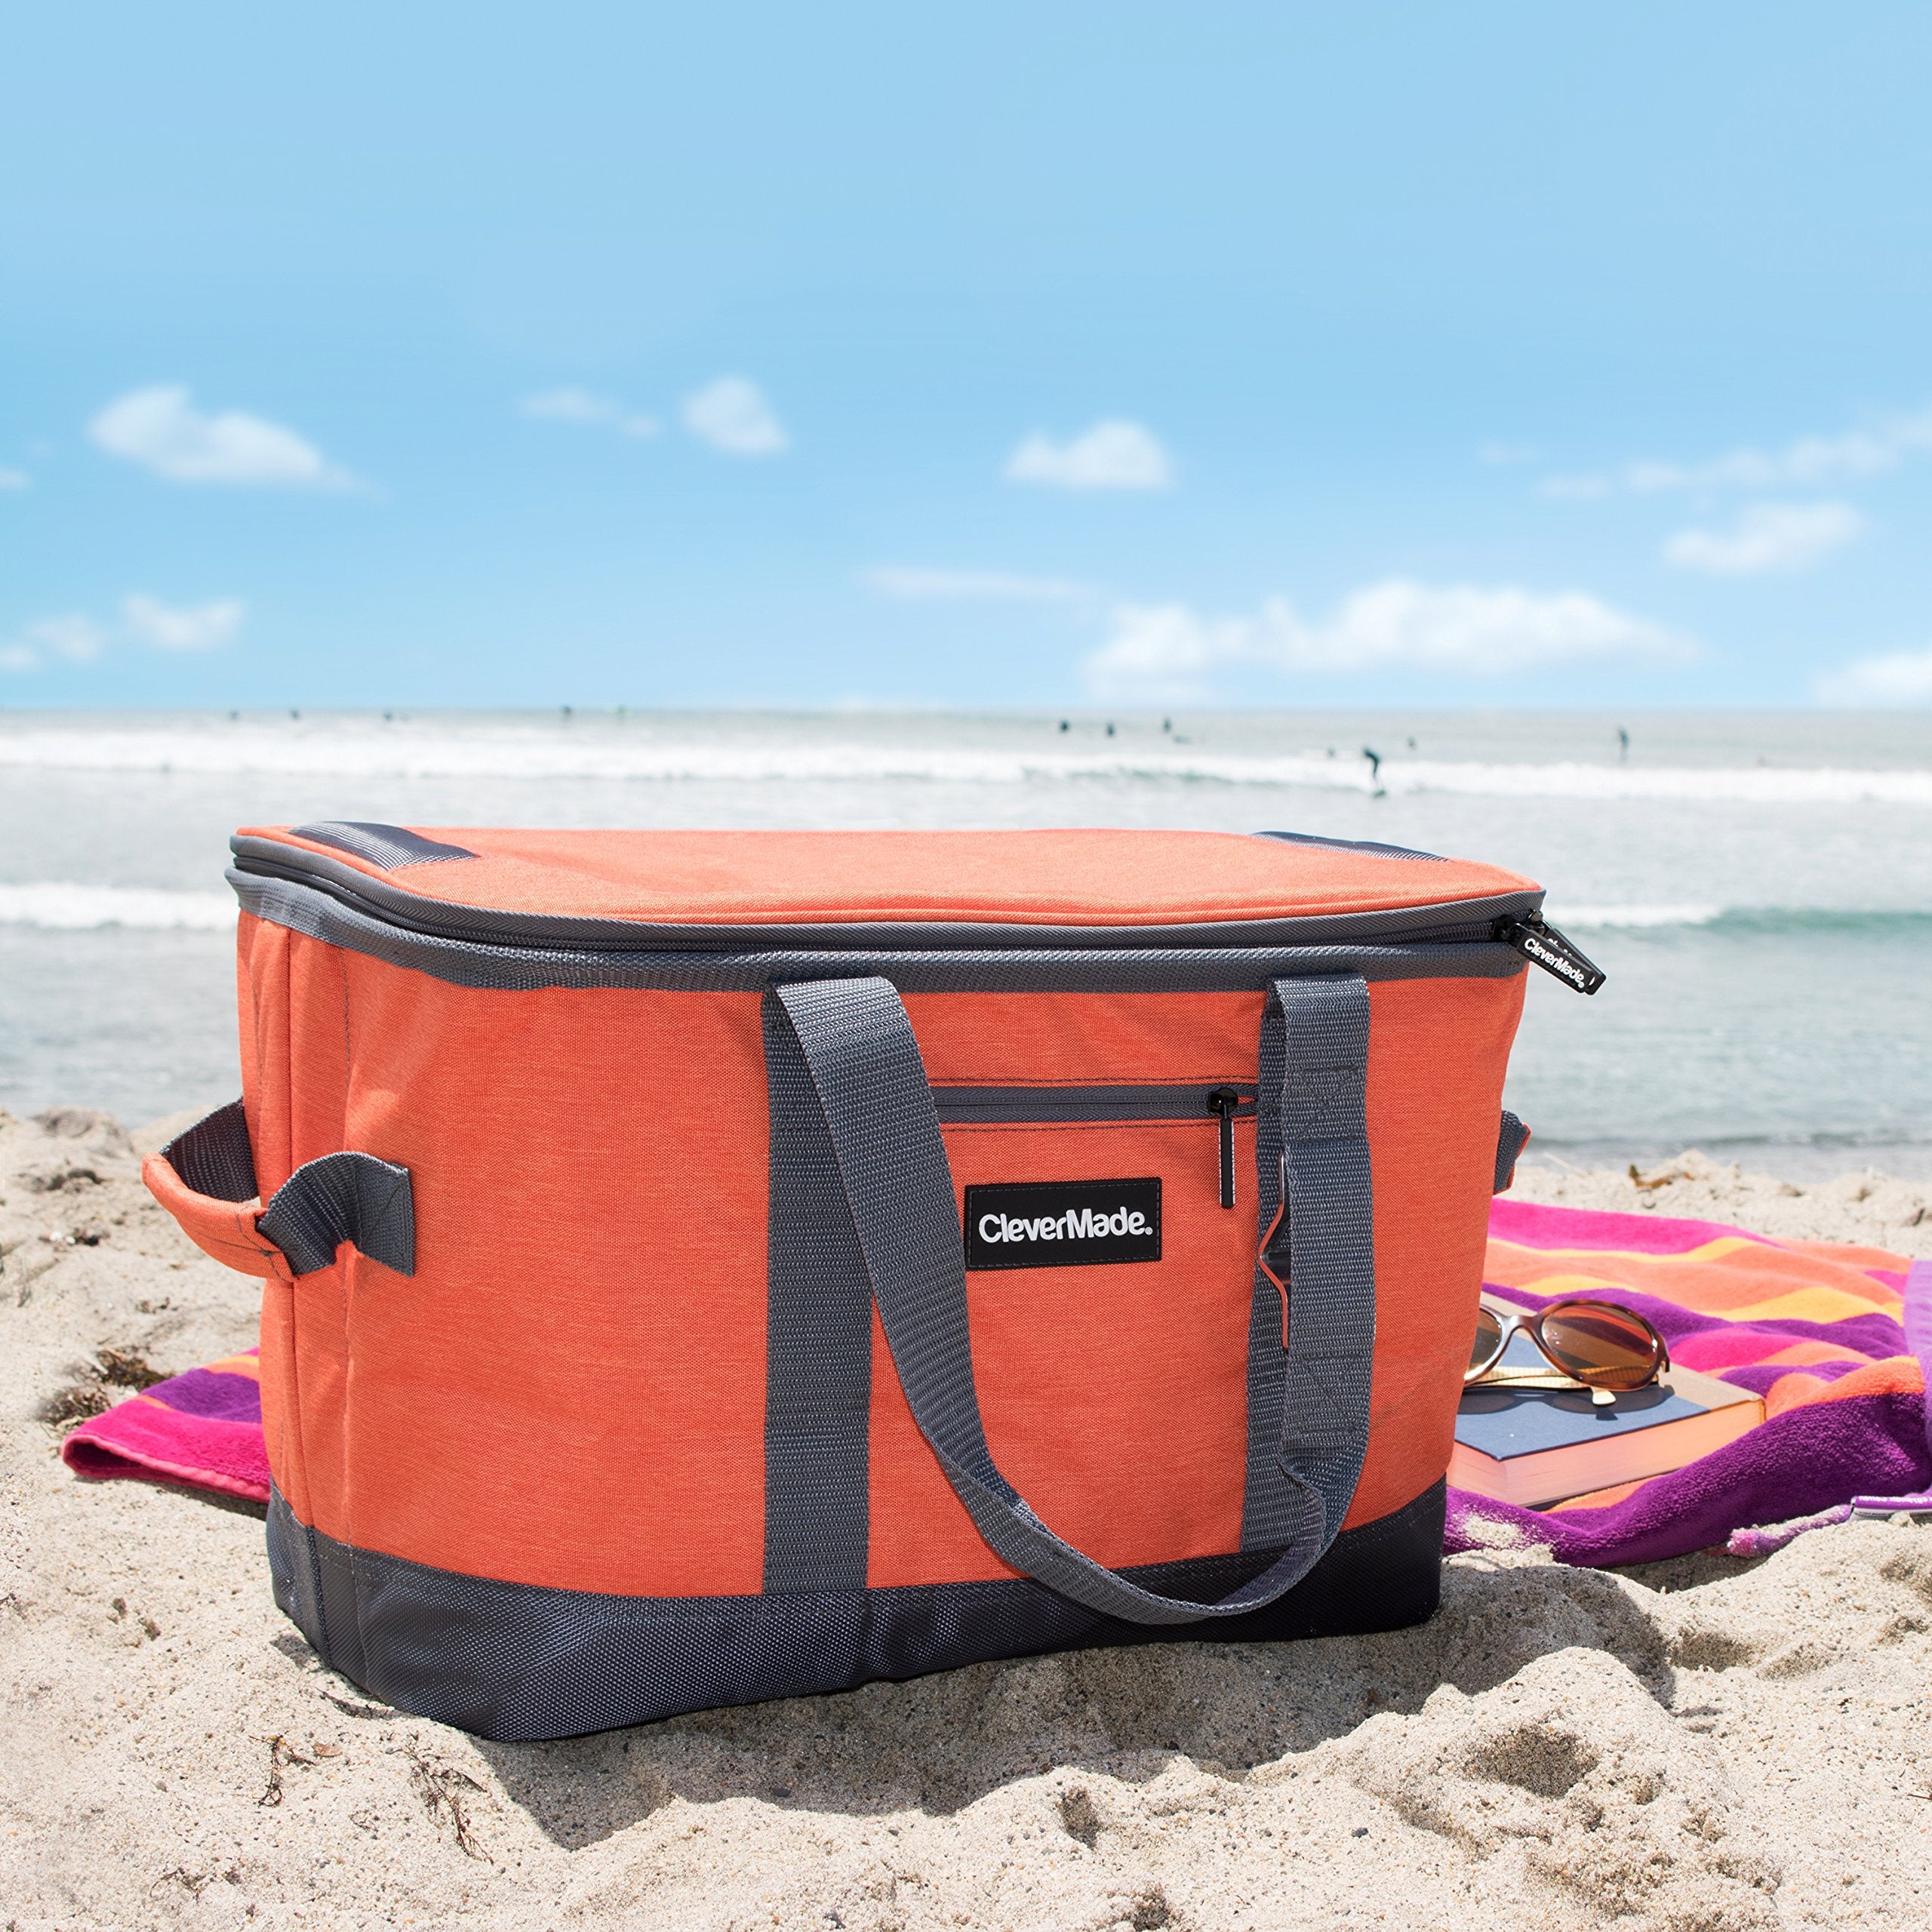 Travel gear: The SnapBasket is a collapsible cooler with a sturdy side